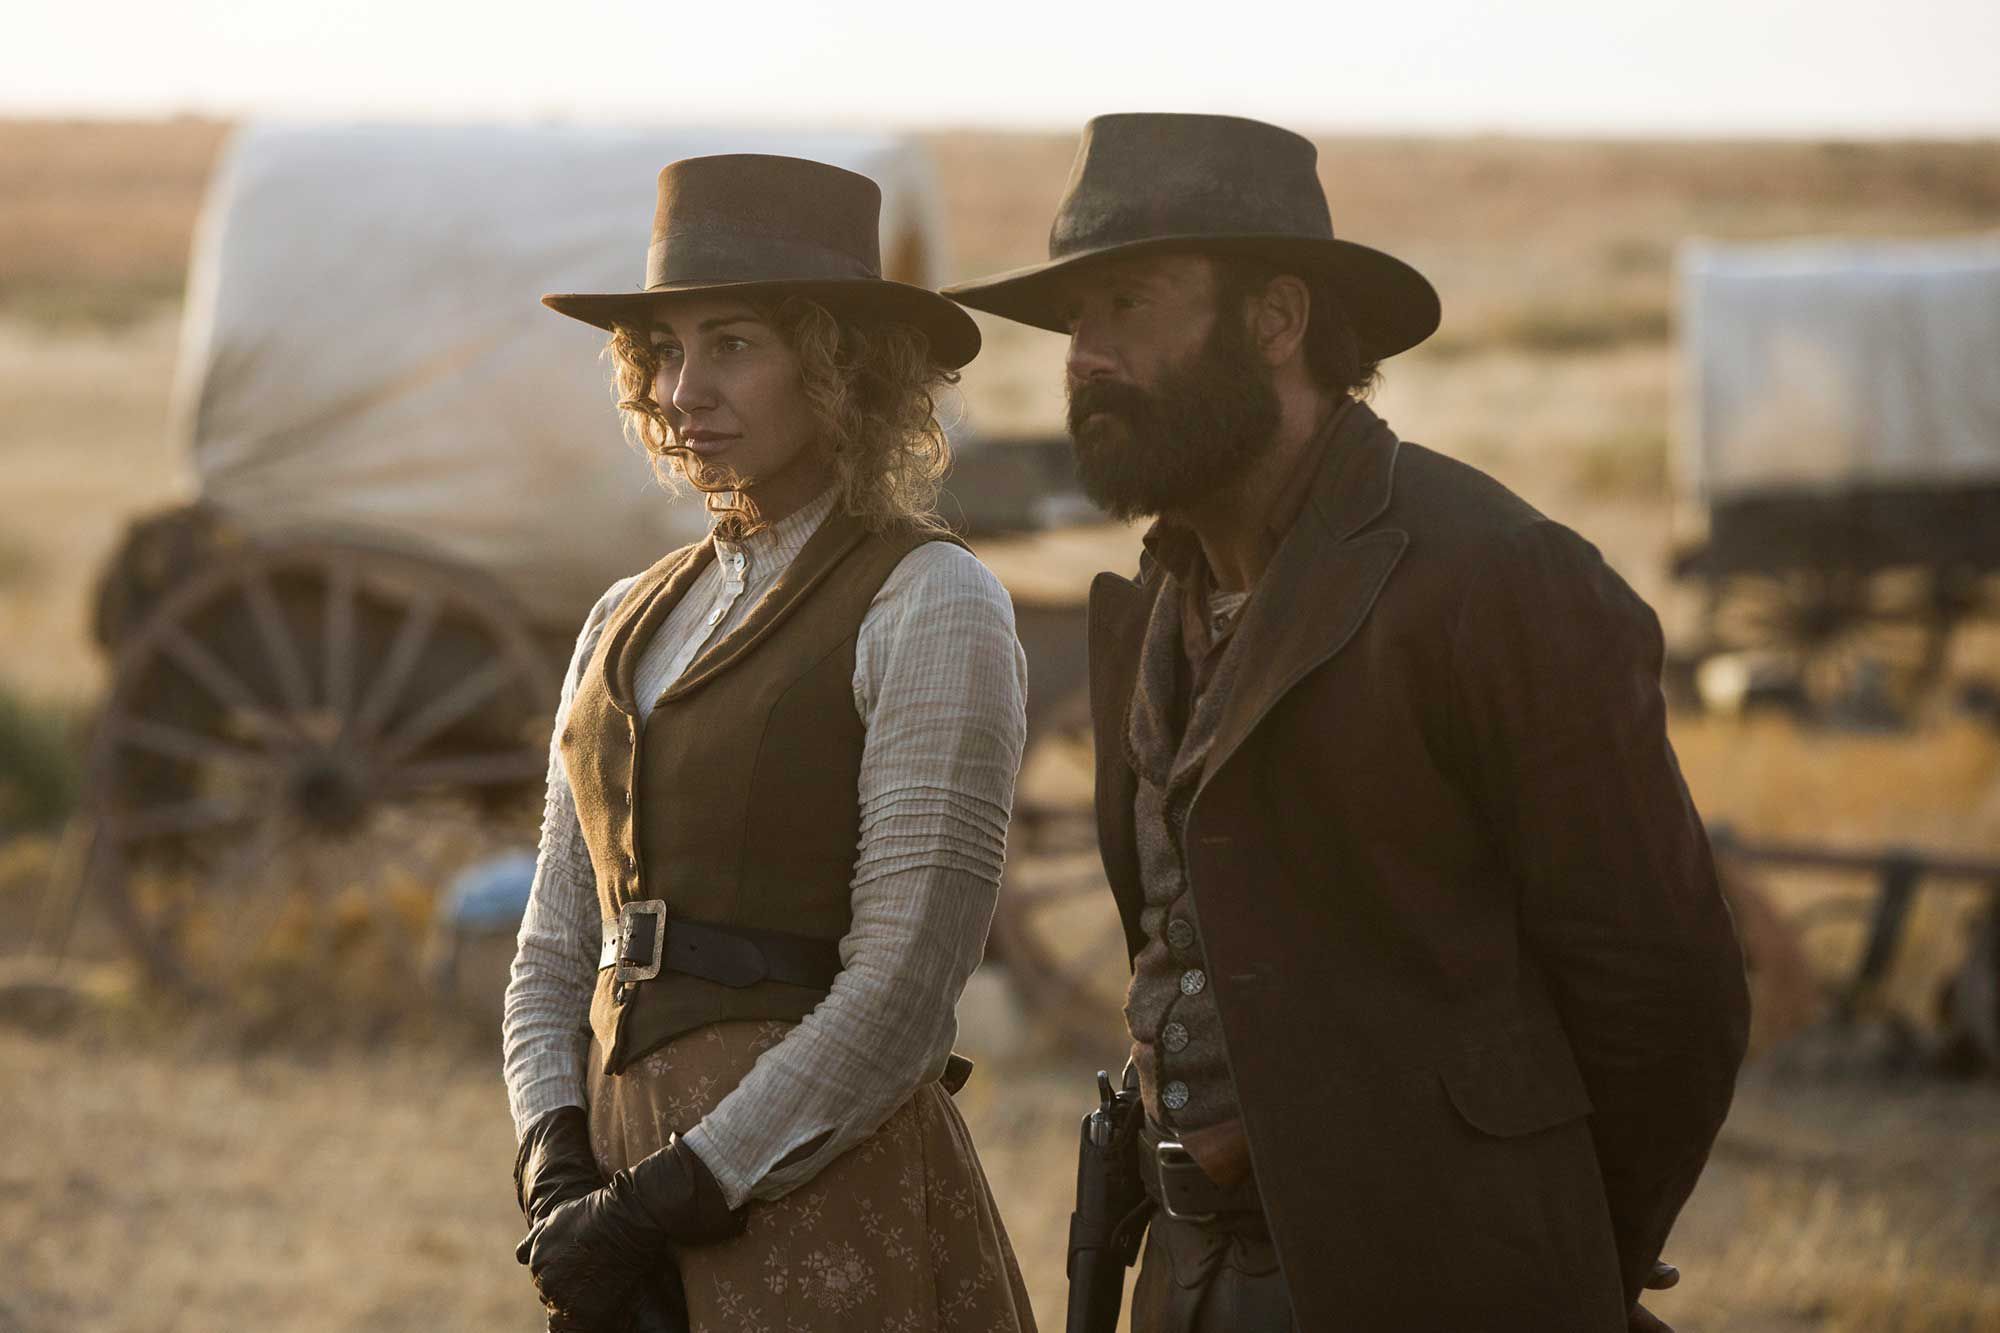 Faith Hill as Margaret and Tim McGraw as James in 1883